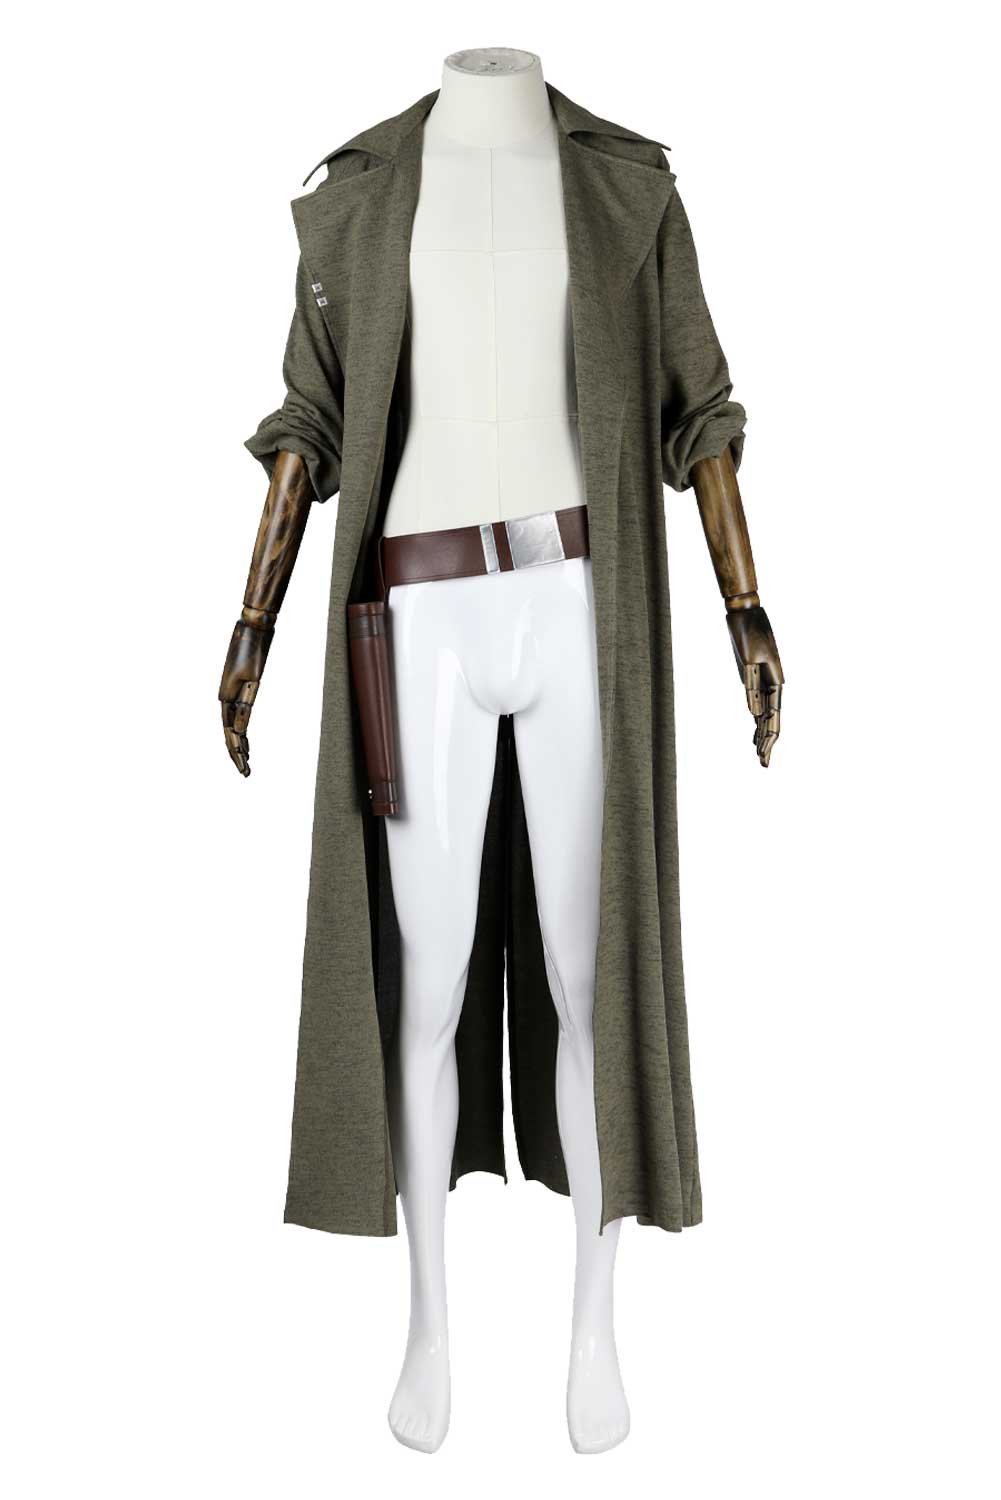 Game SW Outlaws ND-5 Robe With Belt Outfits Halloween Carnival Suit Cosplay Costume